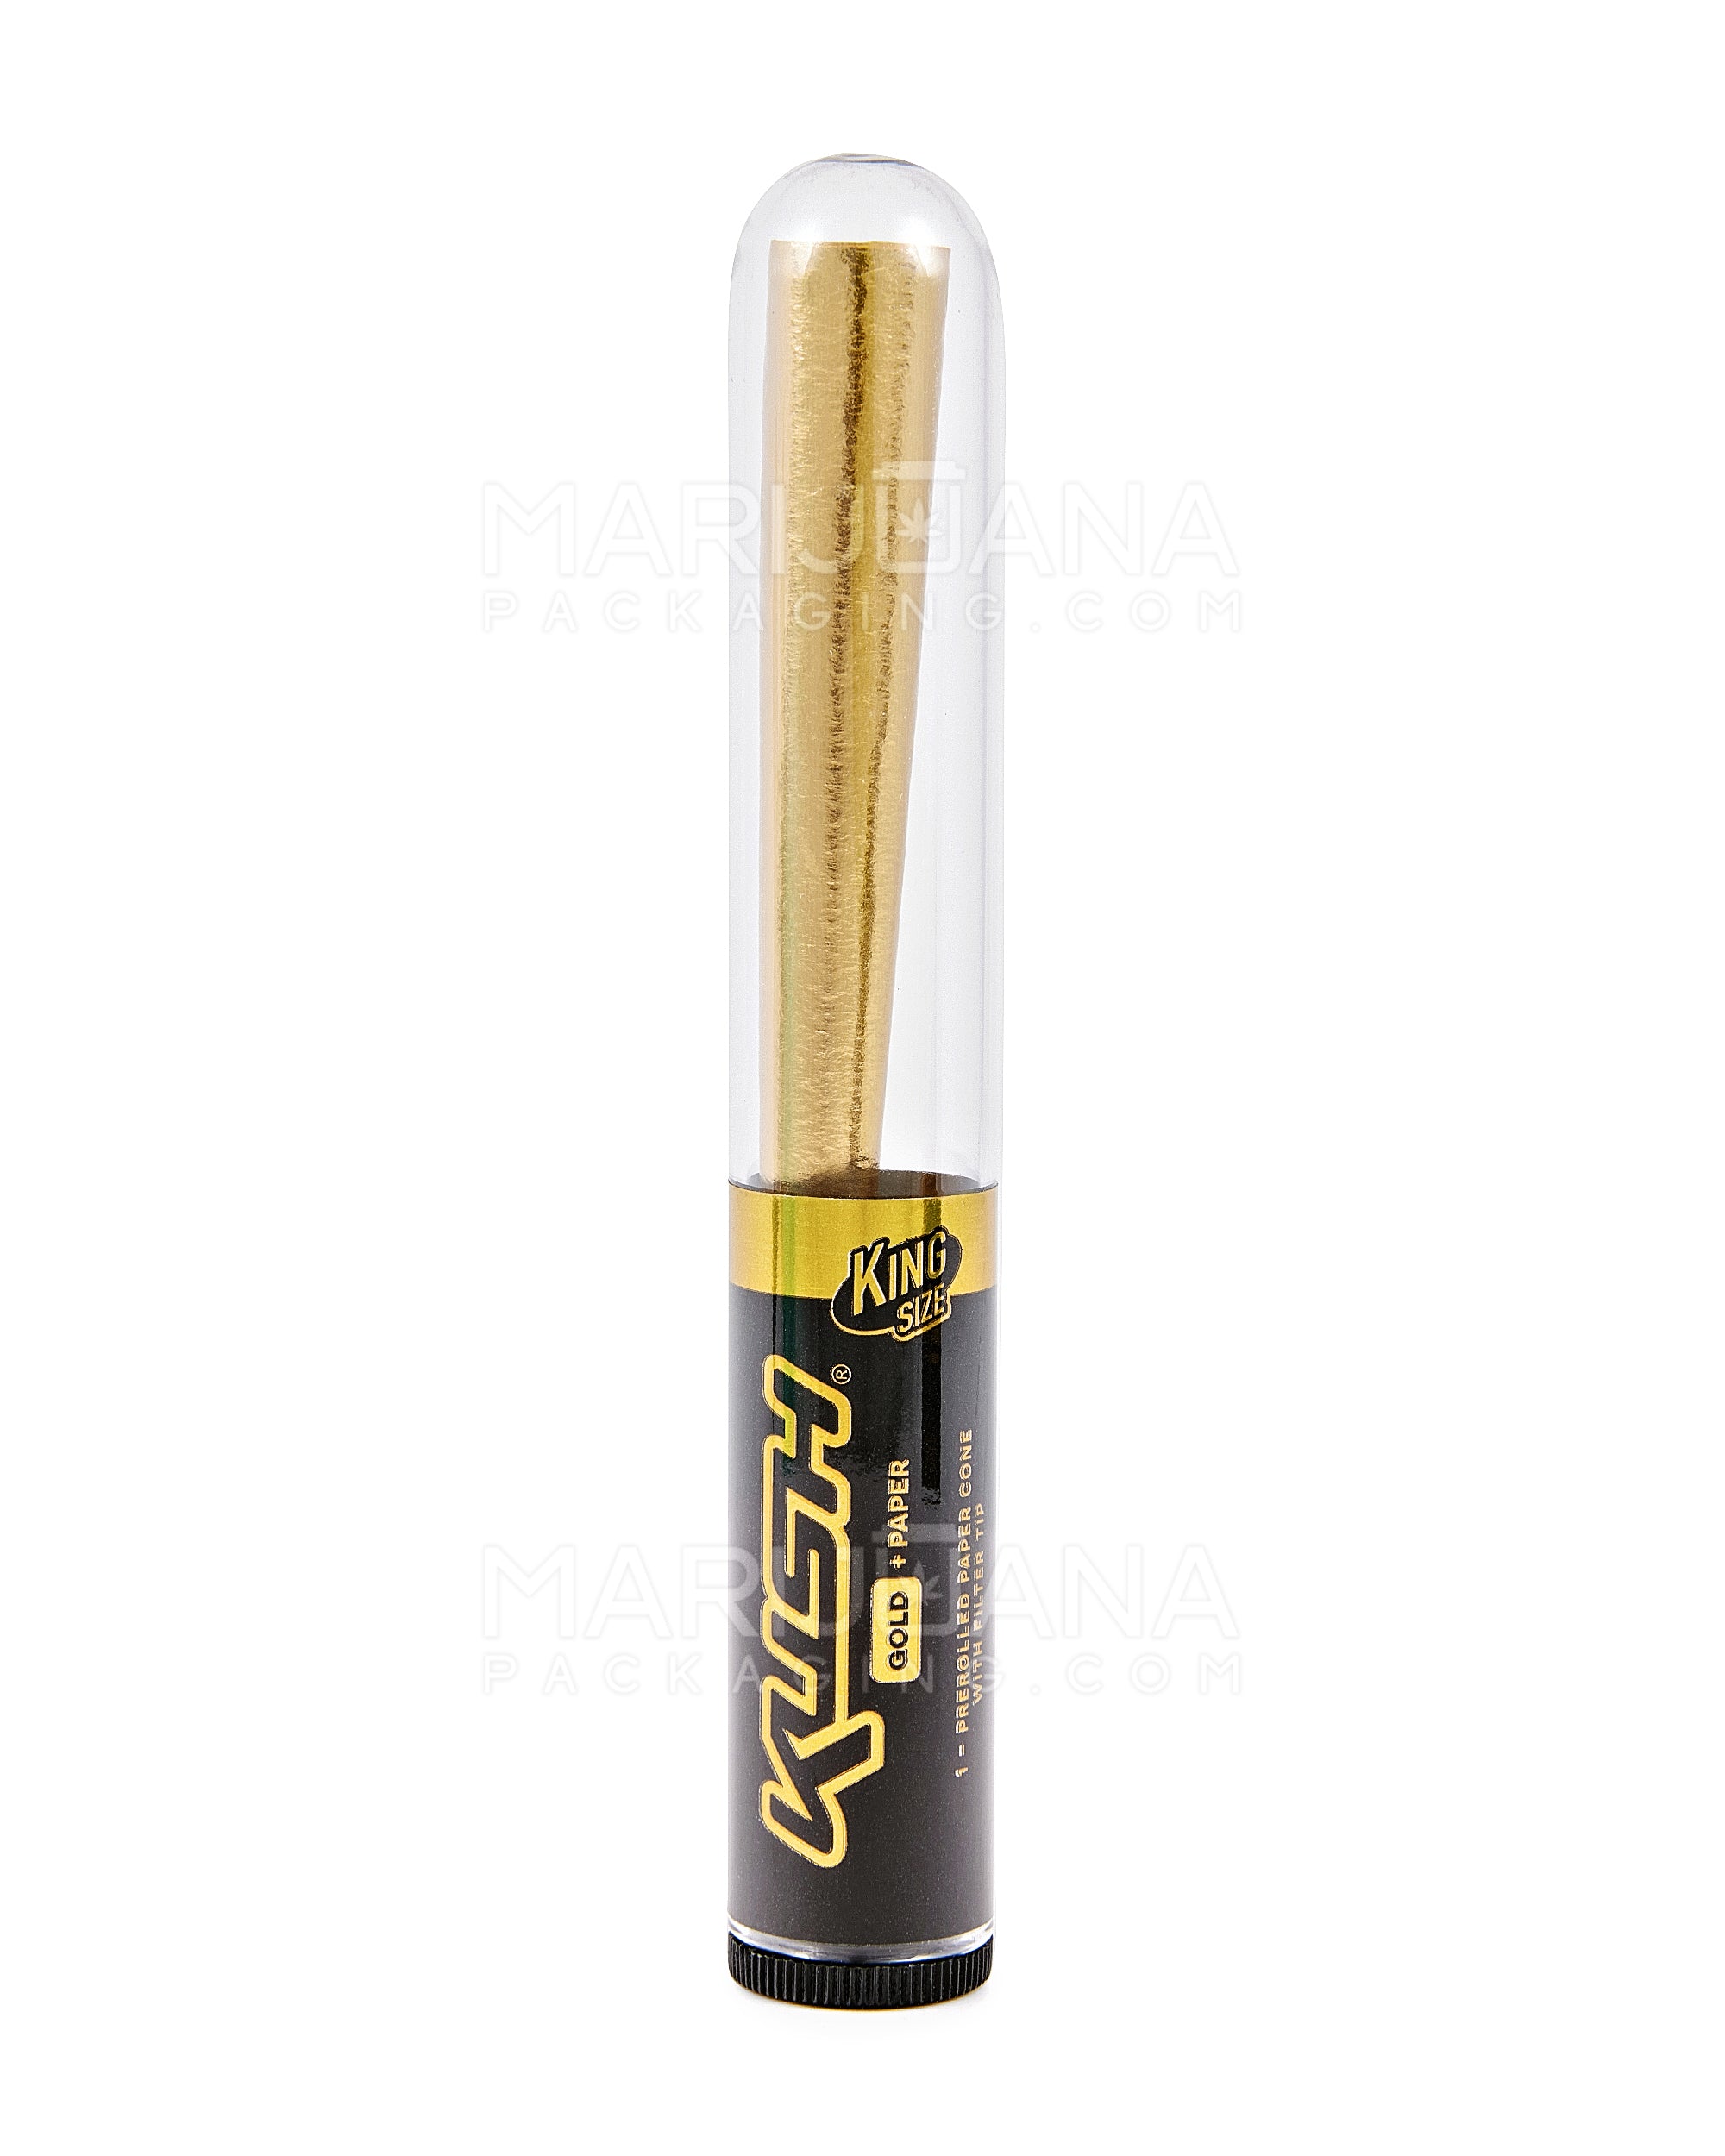 KUSH | 'Retail Display' 24K Gold King Size Paper Pre Rolled Cones | 63mm - Edible Gold - 8 Count - 2